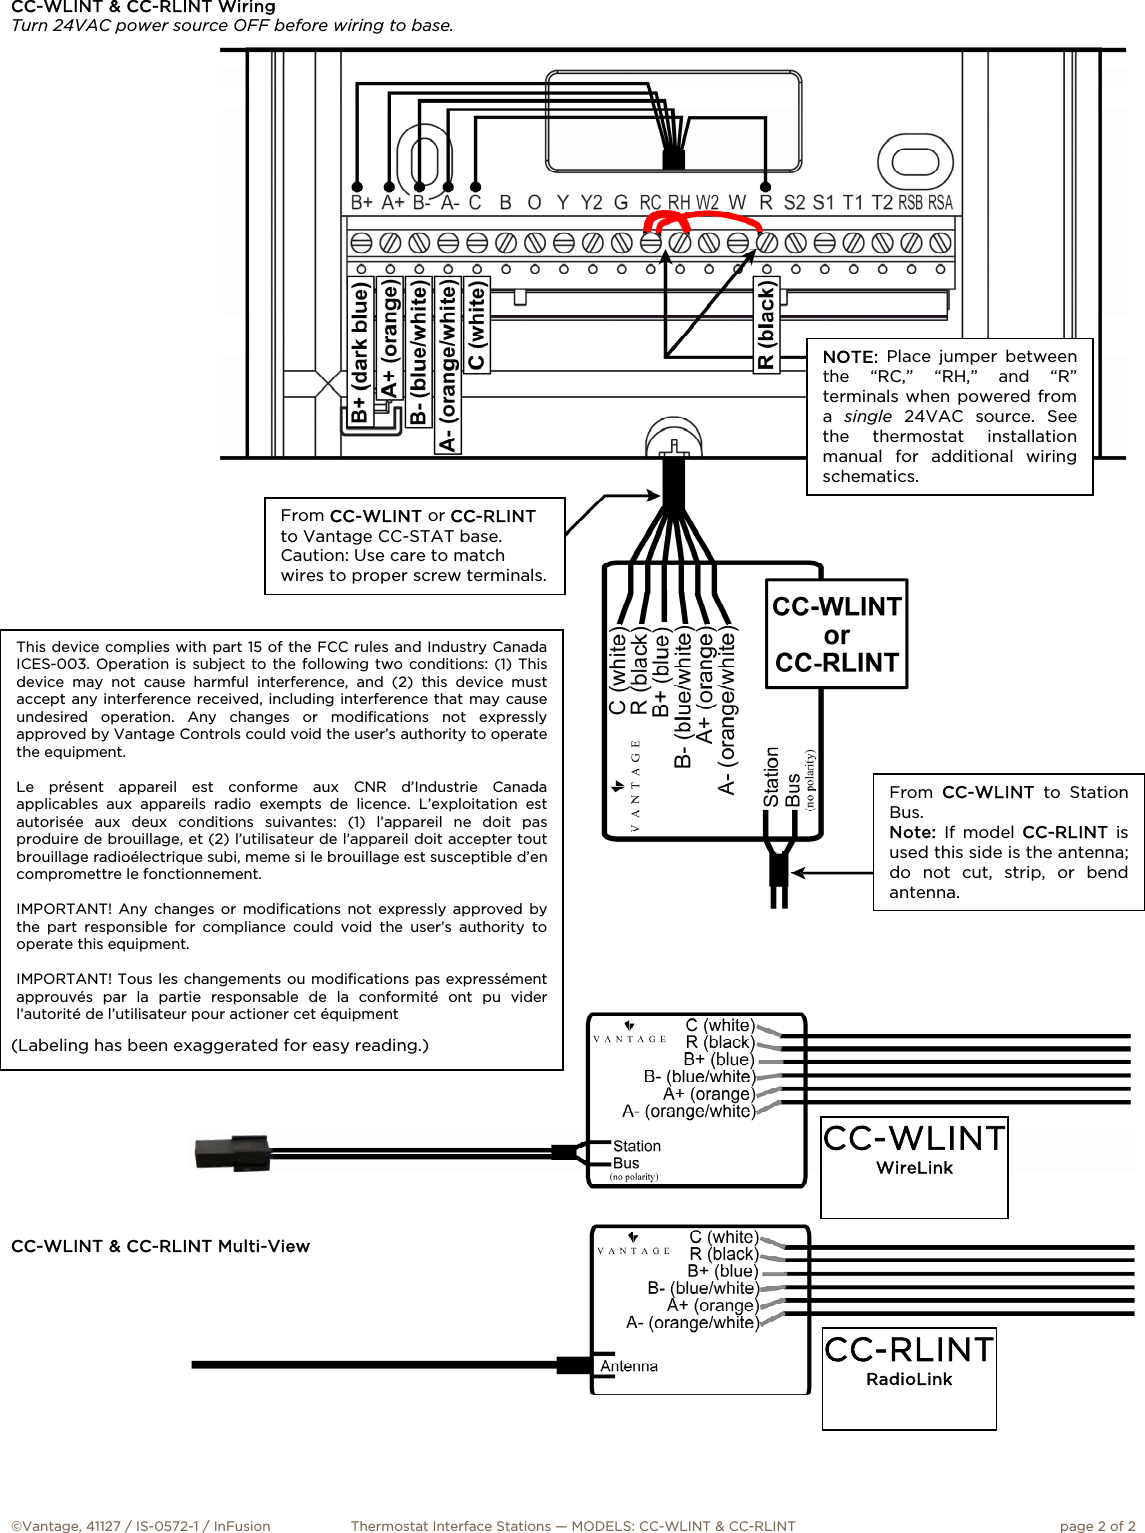   I N S T A L L A T I O N  ©Vantage, 41127 / IS-0572-1 / InFusion  Thermostat Interface Stations — MODELS: CC-WLINT &amp; CC-RLINT  page 2 of 2 CC-WLINTWireLink CC-RLINTRadioLink From  CC-WLINT to Station Bus. Note:  If model CC-RLINT is used this side is the antenna; do not cut, strip, or bend antenna.  From CC-WLINT or CC-RLINTto Vantage CC-STAT base. Caution: Use care to match wires to proper screw terminals. NOTE: Place jumper between the “RC,” “RH,” and “R” terminals when powered from a  single 24VAC source. See the thermostat installation manual for additional wiring schematics.  This device complies with part 15 of the FCC rules and Industry Canada ICES-003. Operation is subject to the following two conditions: (1) This device may not cause harmful interference, and (2) this device must accept any interference received, including interference that may cause undesired operation. Any changes or modifications not expressly approved by Vantage Controls could void the user’s authority to operate the equipment.  Le présent appareil est conforme aux CNR d’Industrie Canada applicables aux appareils radio exempts de licence. L’exploitation est autorisée aux deux conditions suivantes: (1) l’appareil ne doit pas produire de brouillage, et (2) l’utilisateur de l’appareil doit accepter tout brouillage radioélectrique subi, meme si le brouillage est susceptible d’en compromettre le fonctionnement.   IMPORTANT! Any changes or modifications not expressly approved by the part responsible for compliance could void the user’s authority to operate this equipment.   IMPORTANT! Tous les changements ou modifications pas expressément approuvés par la partie responsable de la conformité ont pu vider l’autorité de l’utilisateur pour actioner cet équipment CC-WLINT &amp; CC-RLINT Wiring Turn 24VAC power source OFF before wiring to base.                                                   (Labeling has been exaggerated for easy reading.)          CC-WLINT &amp; CC-RLINT Multi-View 